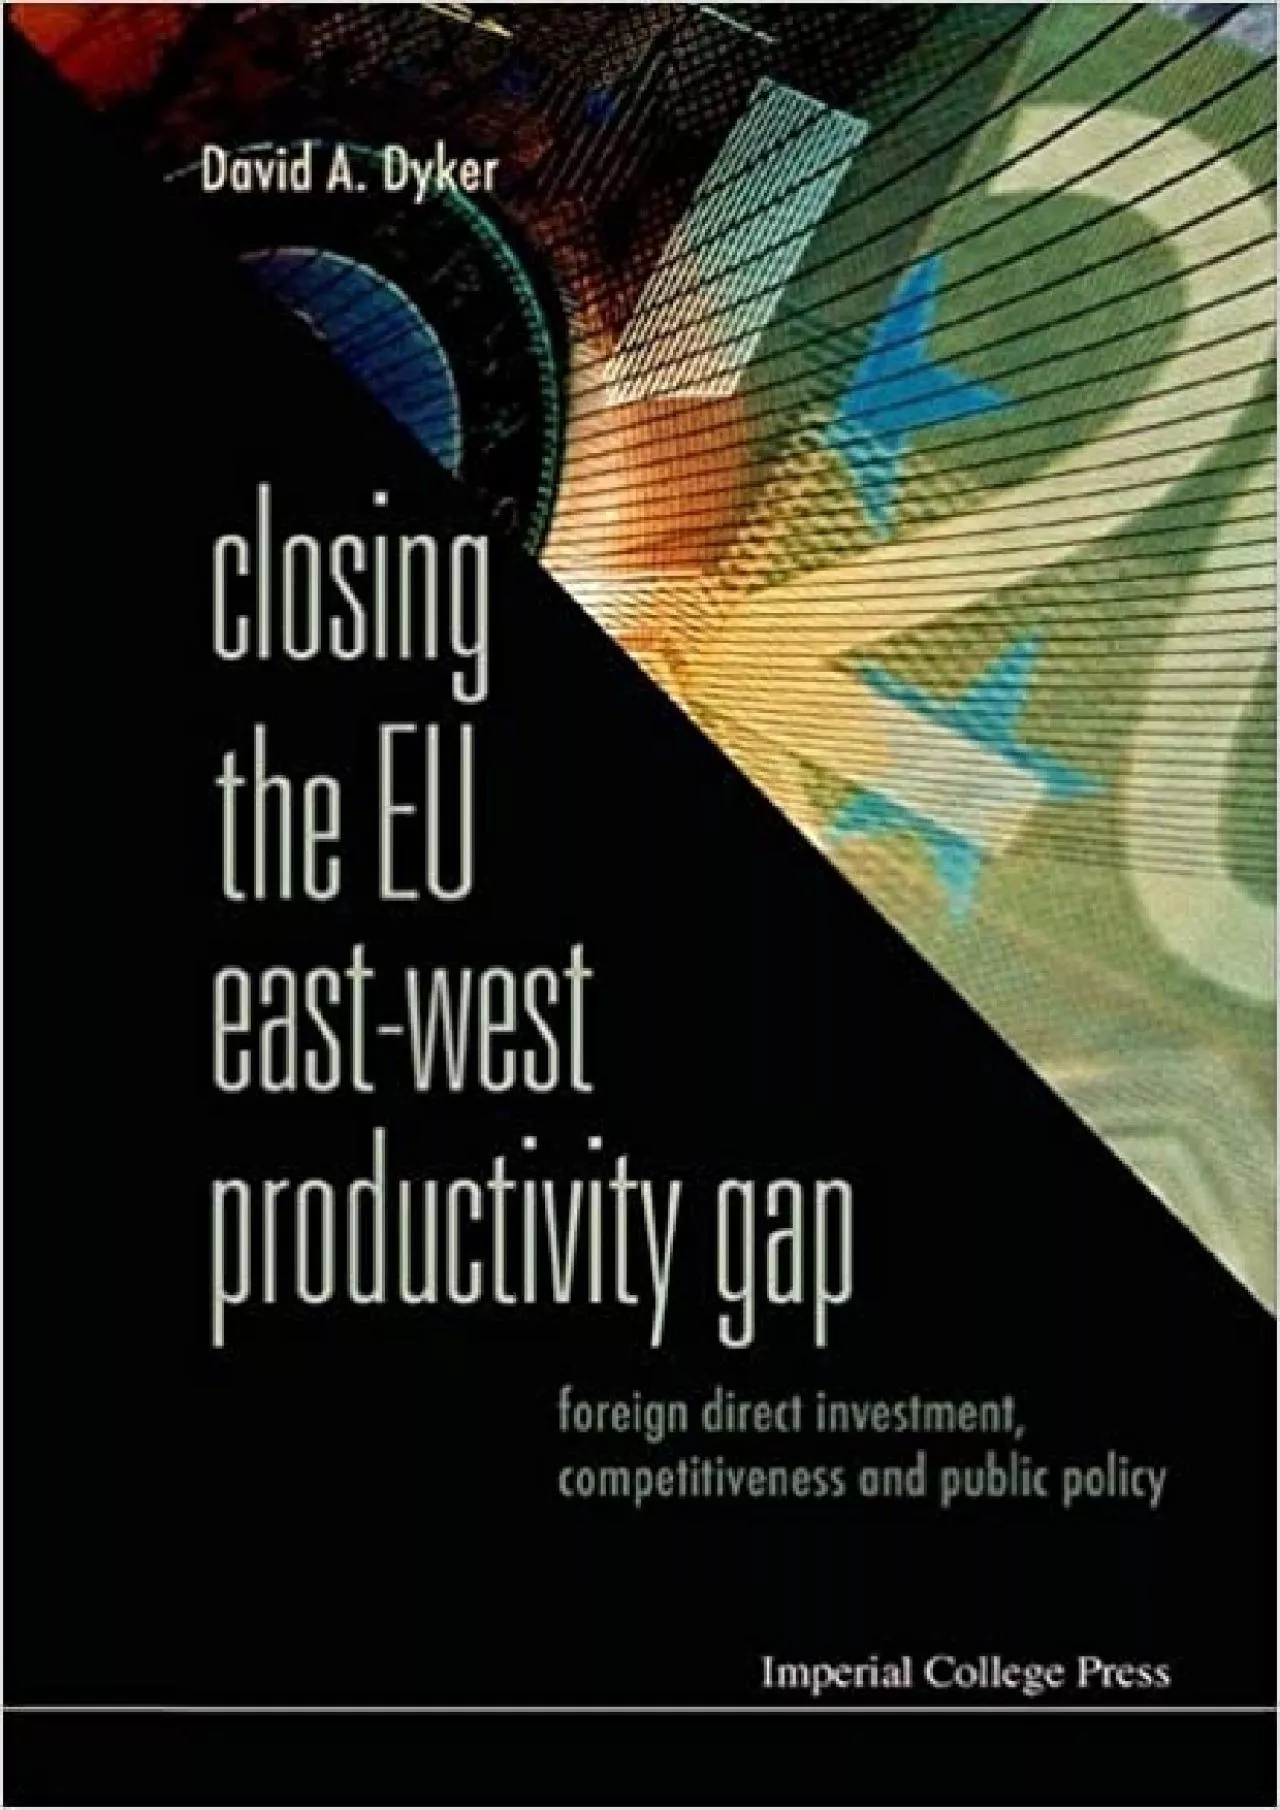 Closing The Eu East-West Productivity Gap: Foreign Direct Investment Competitiveness And